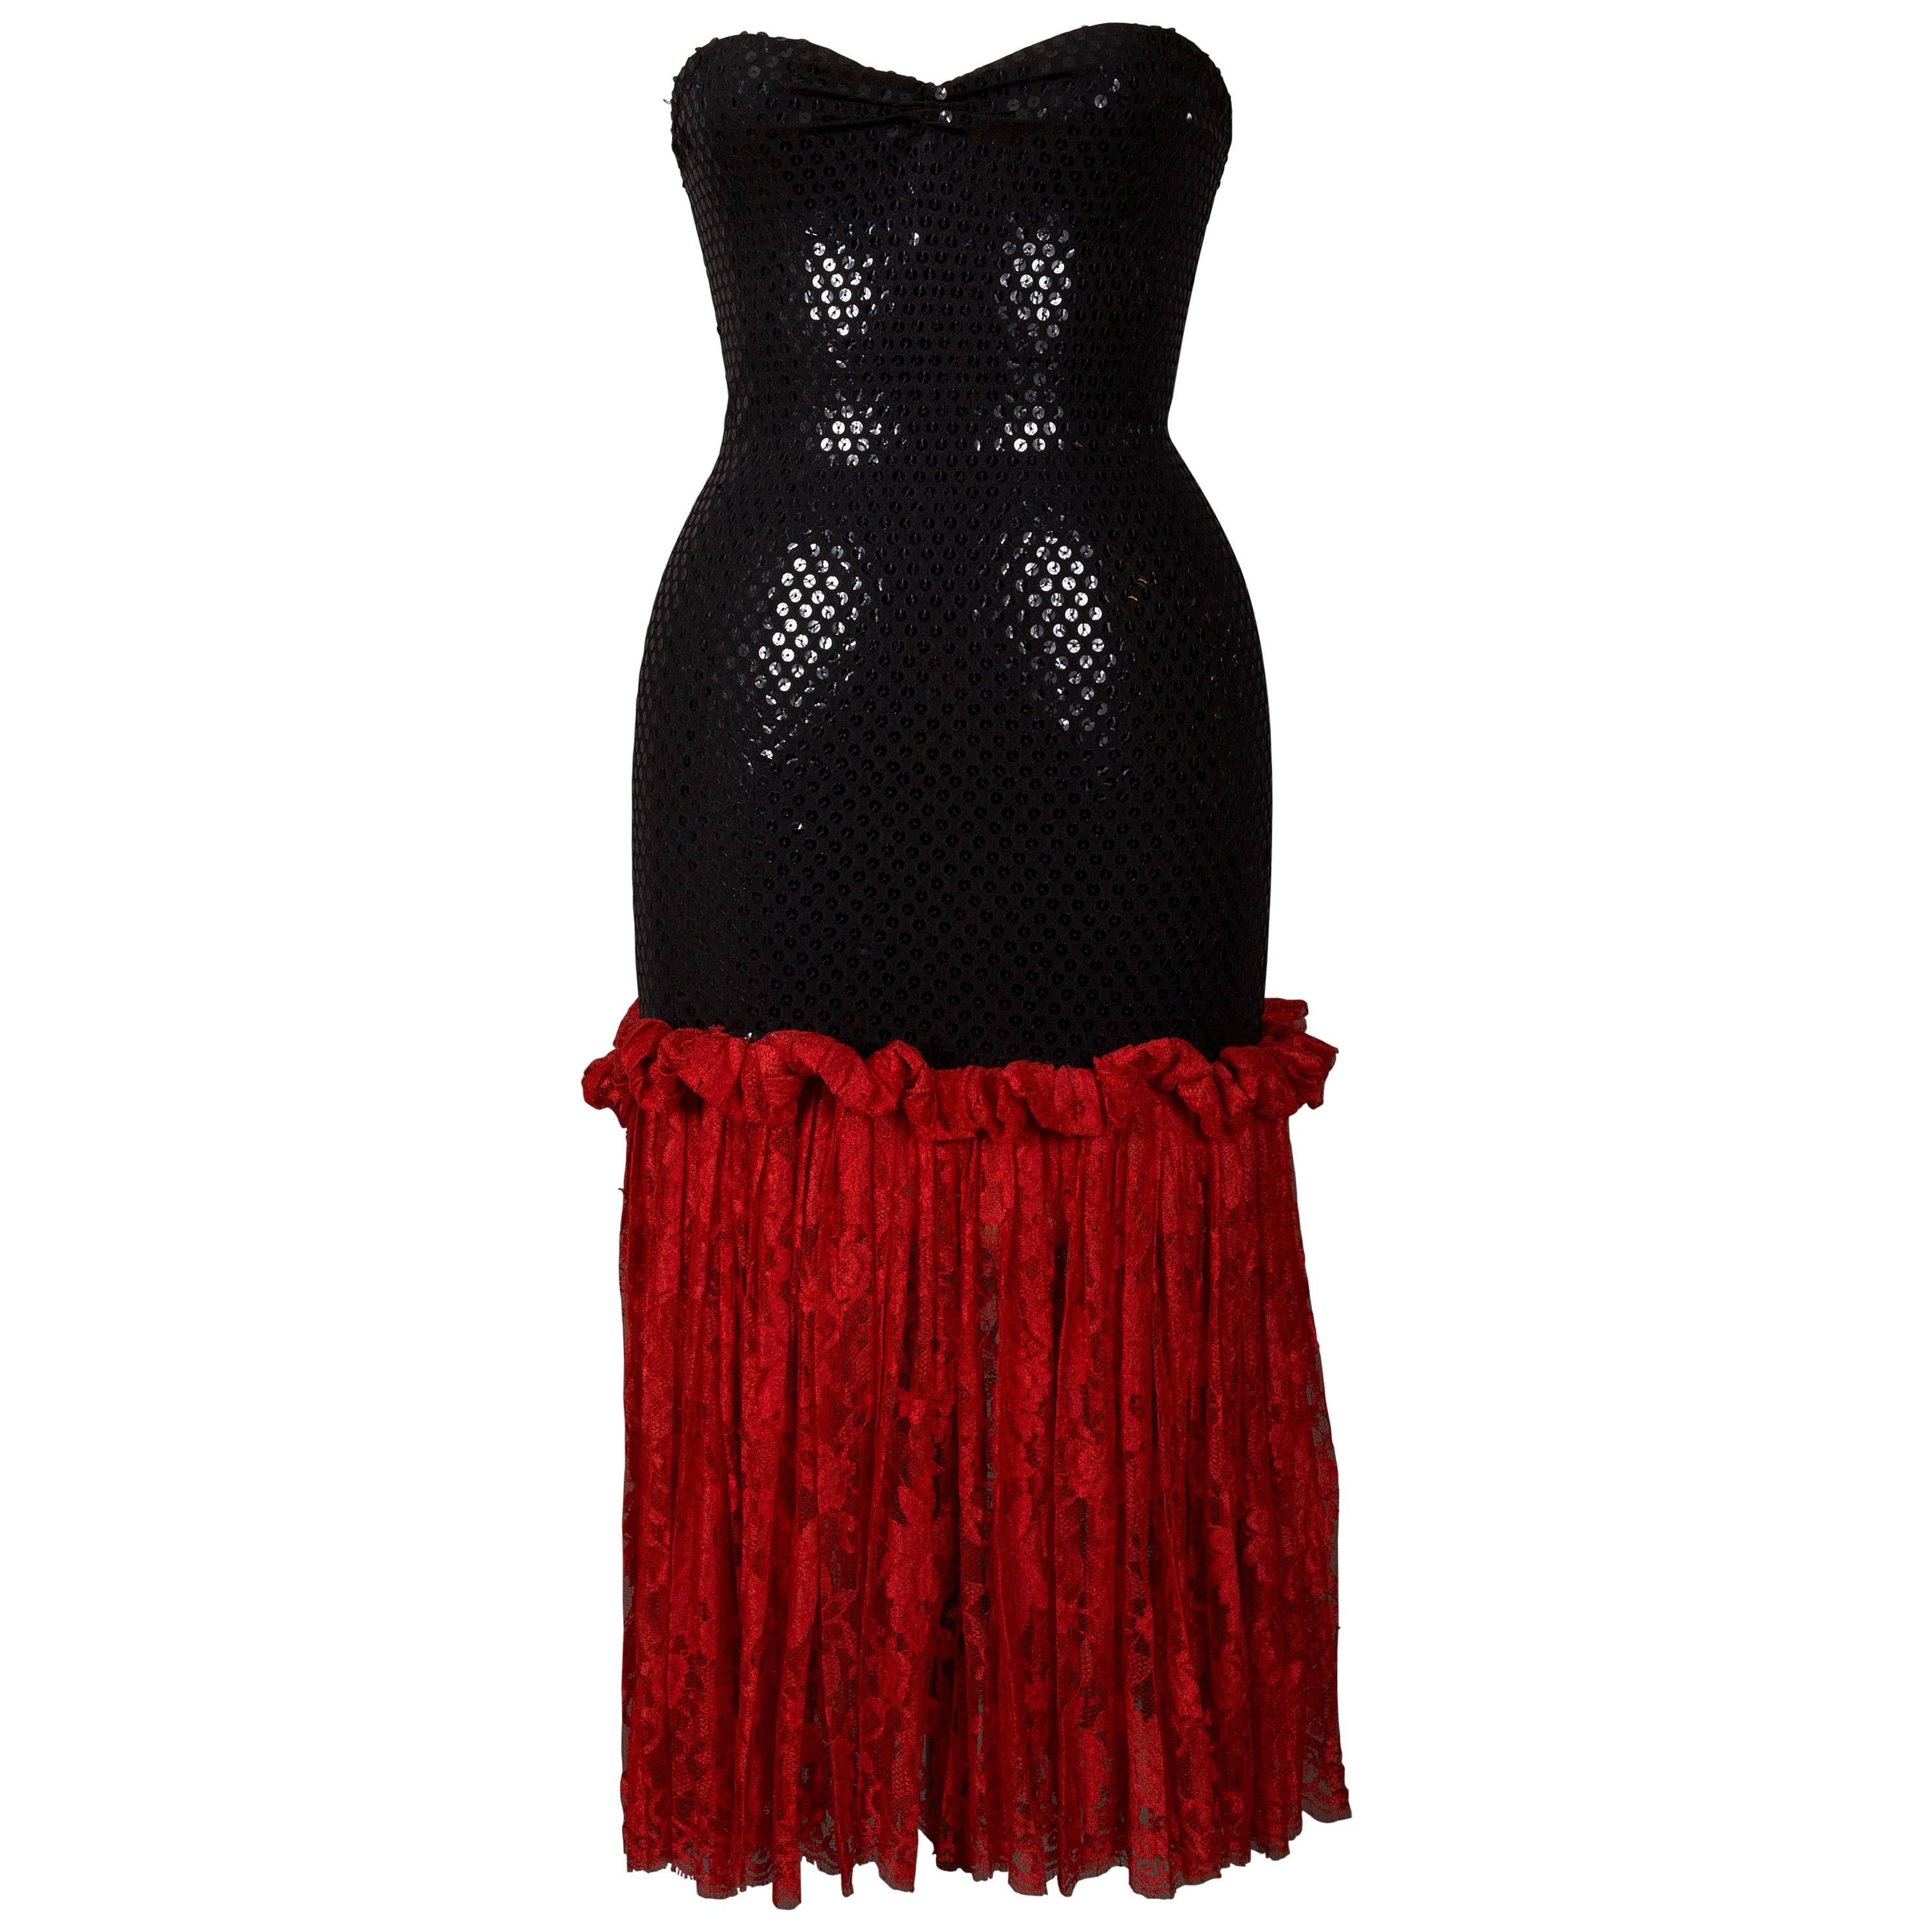 Bastet strapless sequin cocktail dress with red lace skirt, circa late 1970s